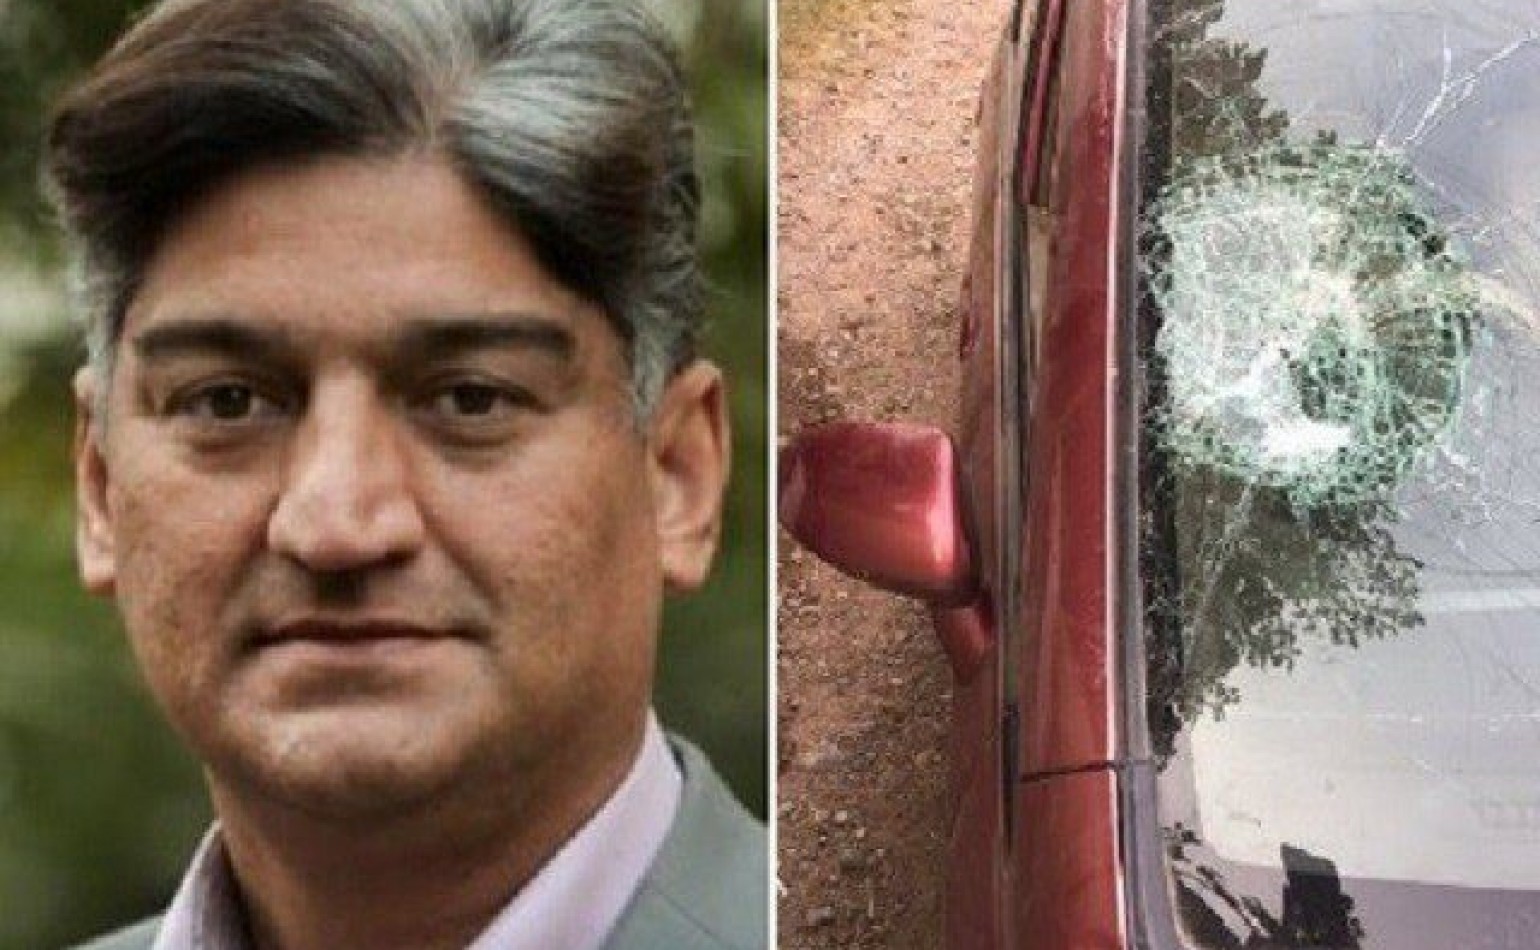 Media Matters for Democracy expresses concern over an attack on Matiullah Jan’s vehicle; calls for a thorough investigation of the incident